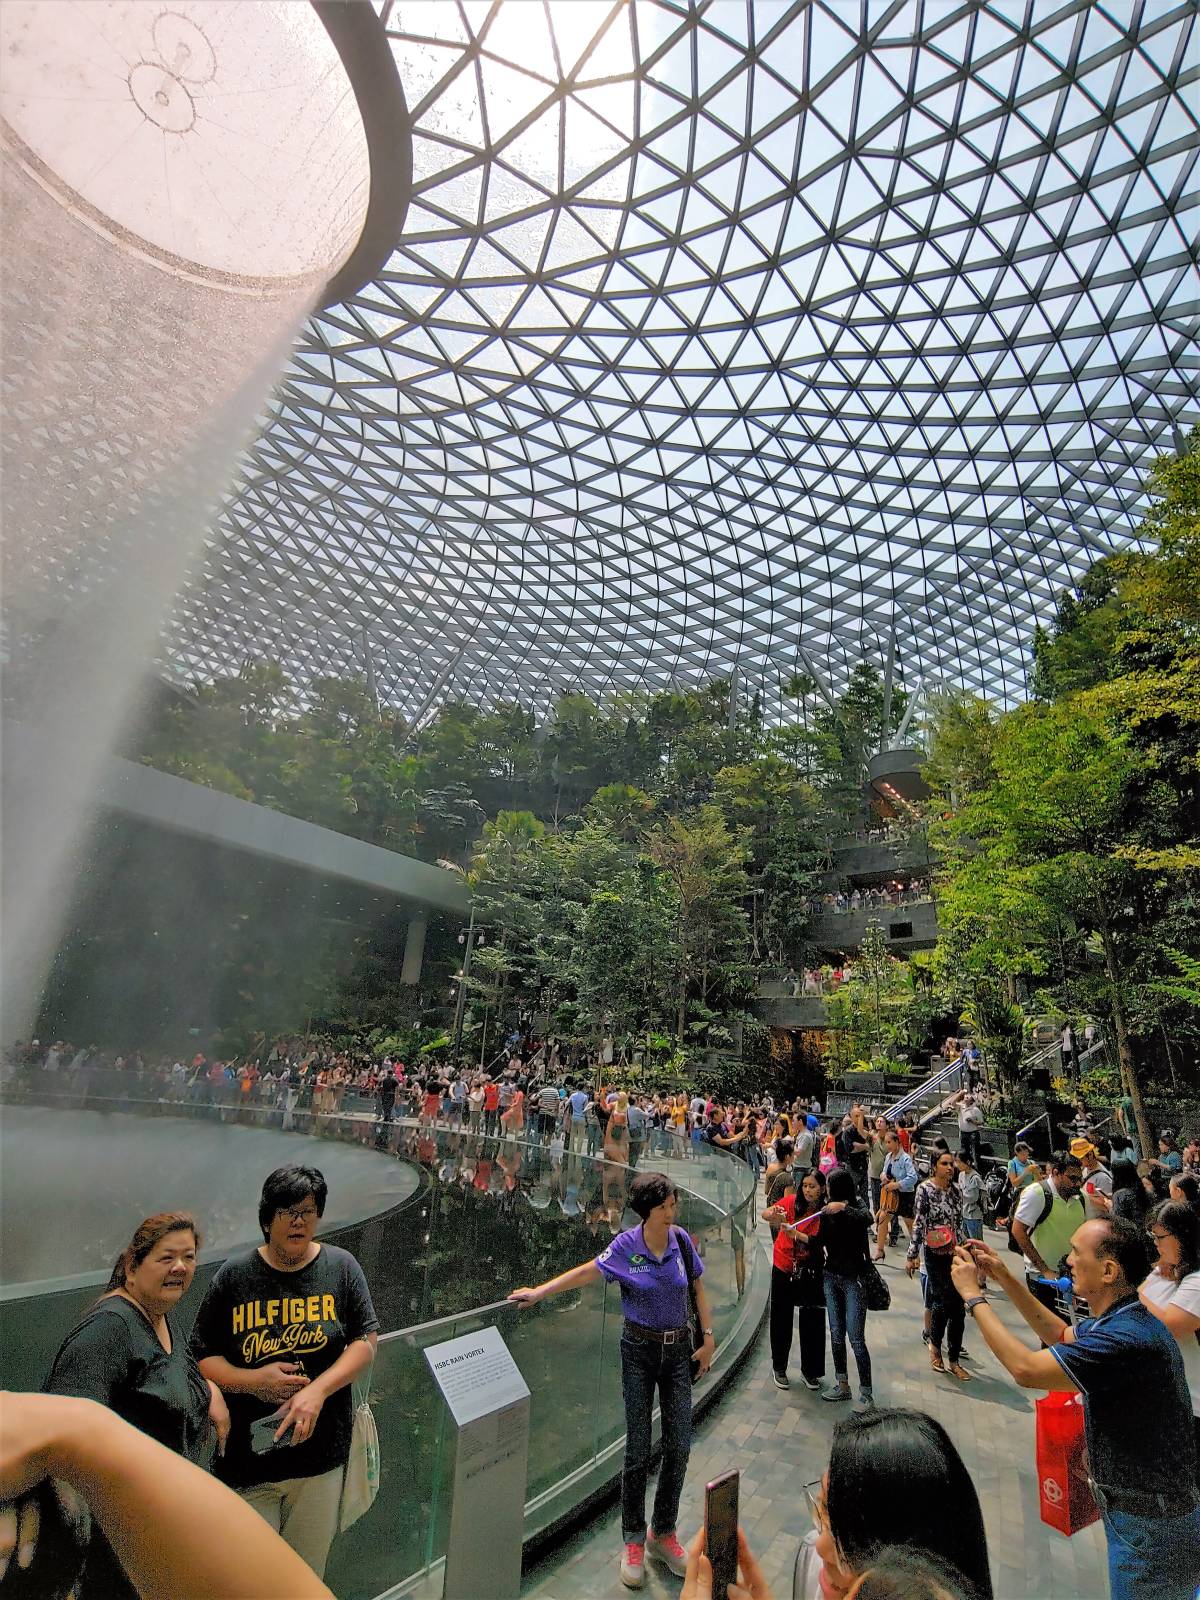 SINGAPOREANS FLOCK TO JEWEL CHANGI AIRPORT ON ITS OPENING WEEKEND